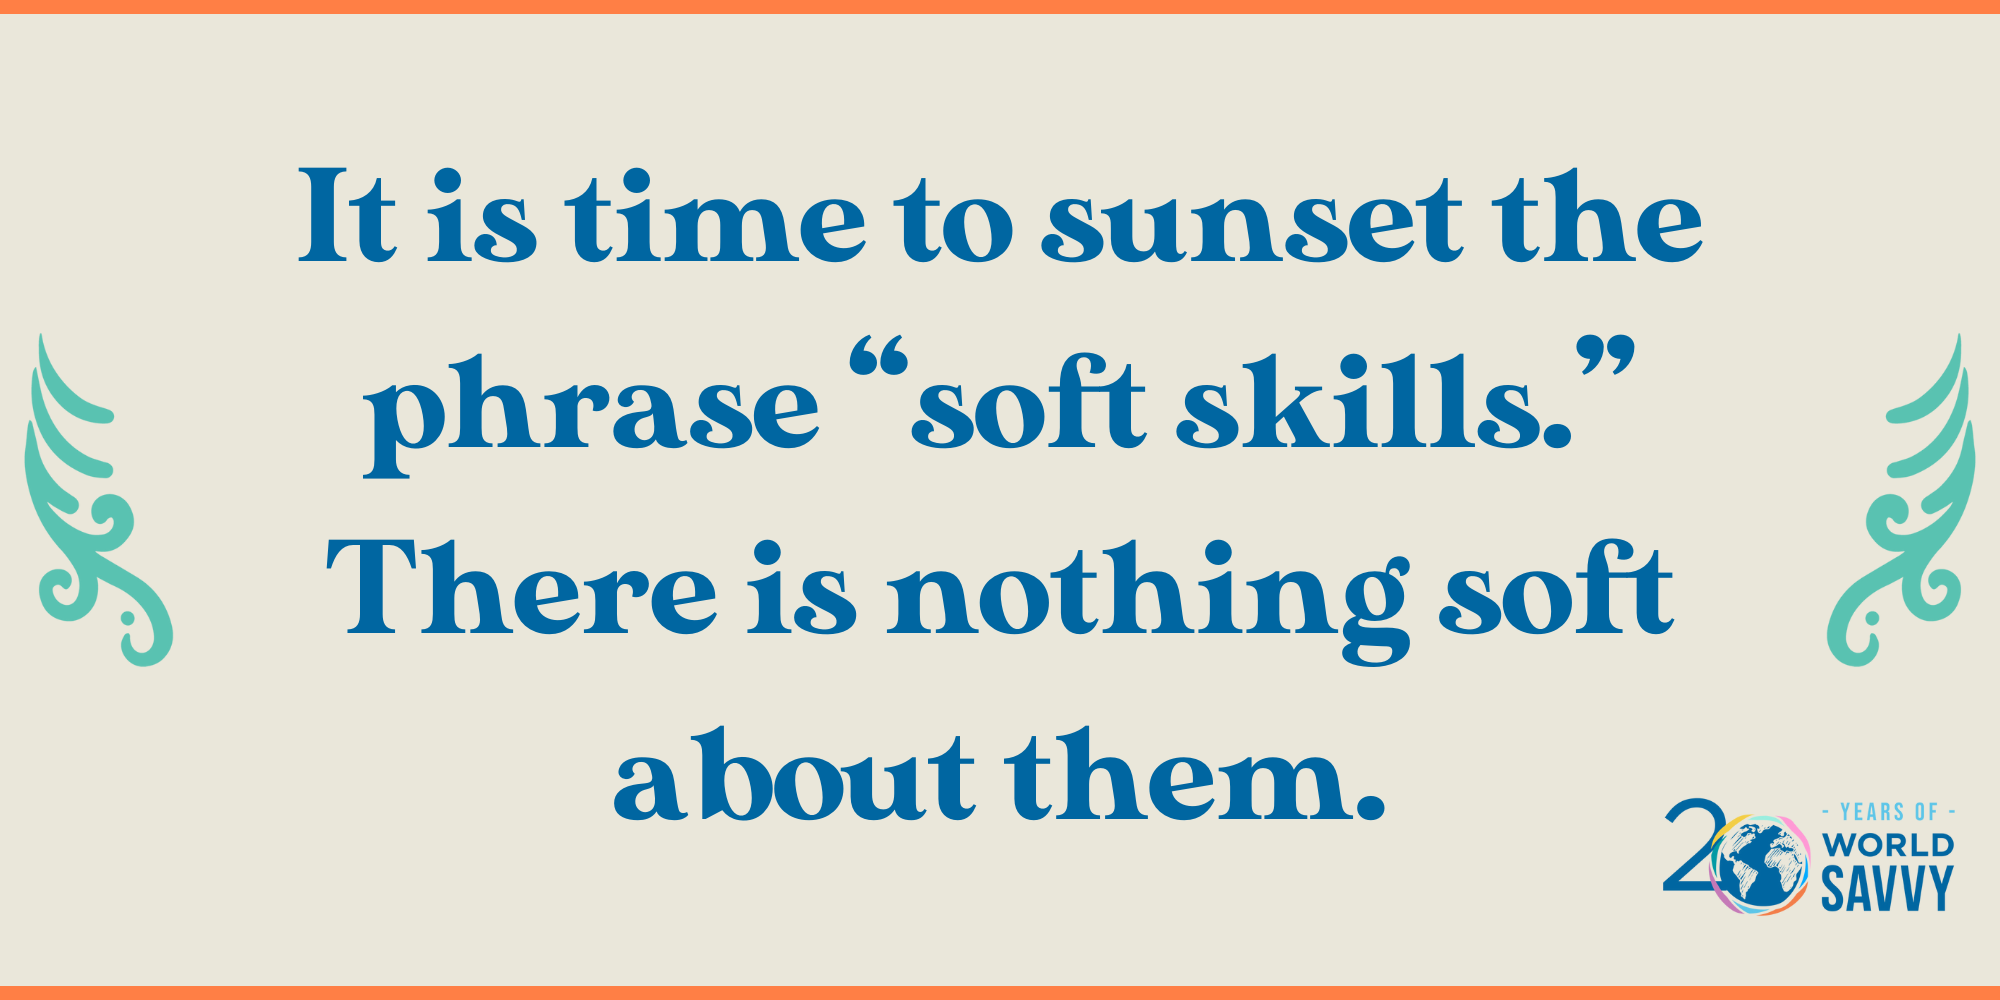 "It is time to sunset the phrase soft skills. There is nothing soft about them."